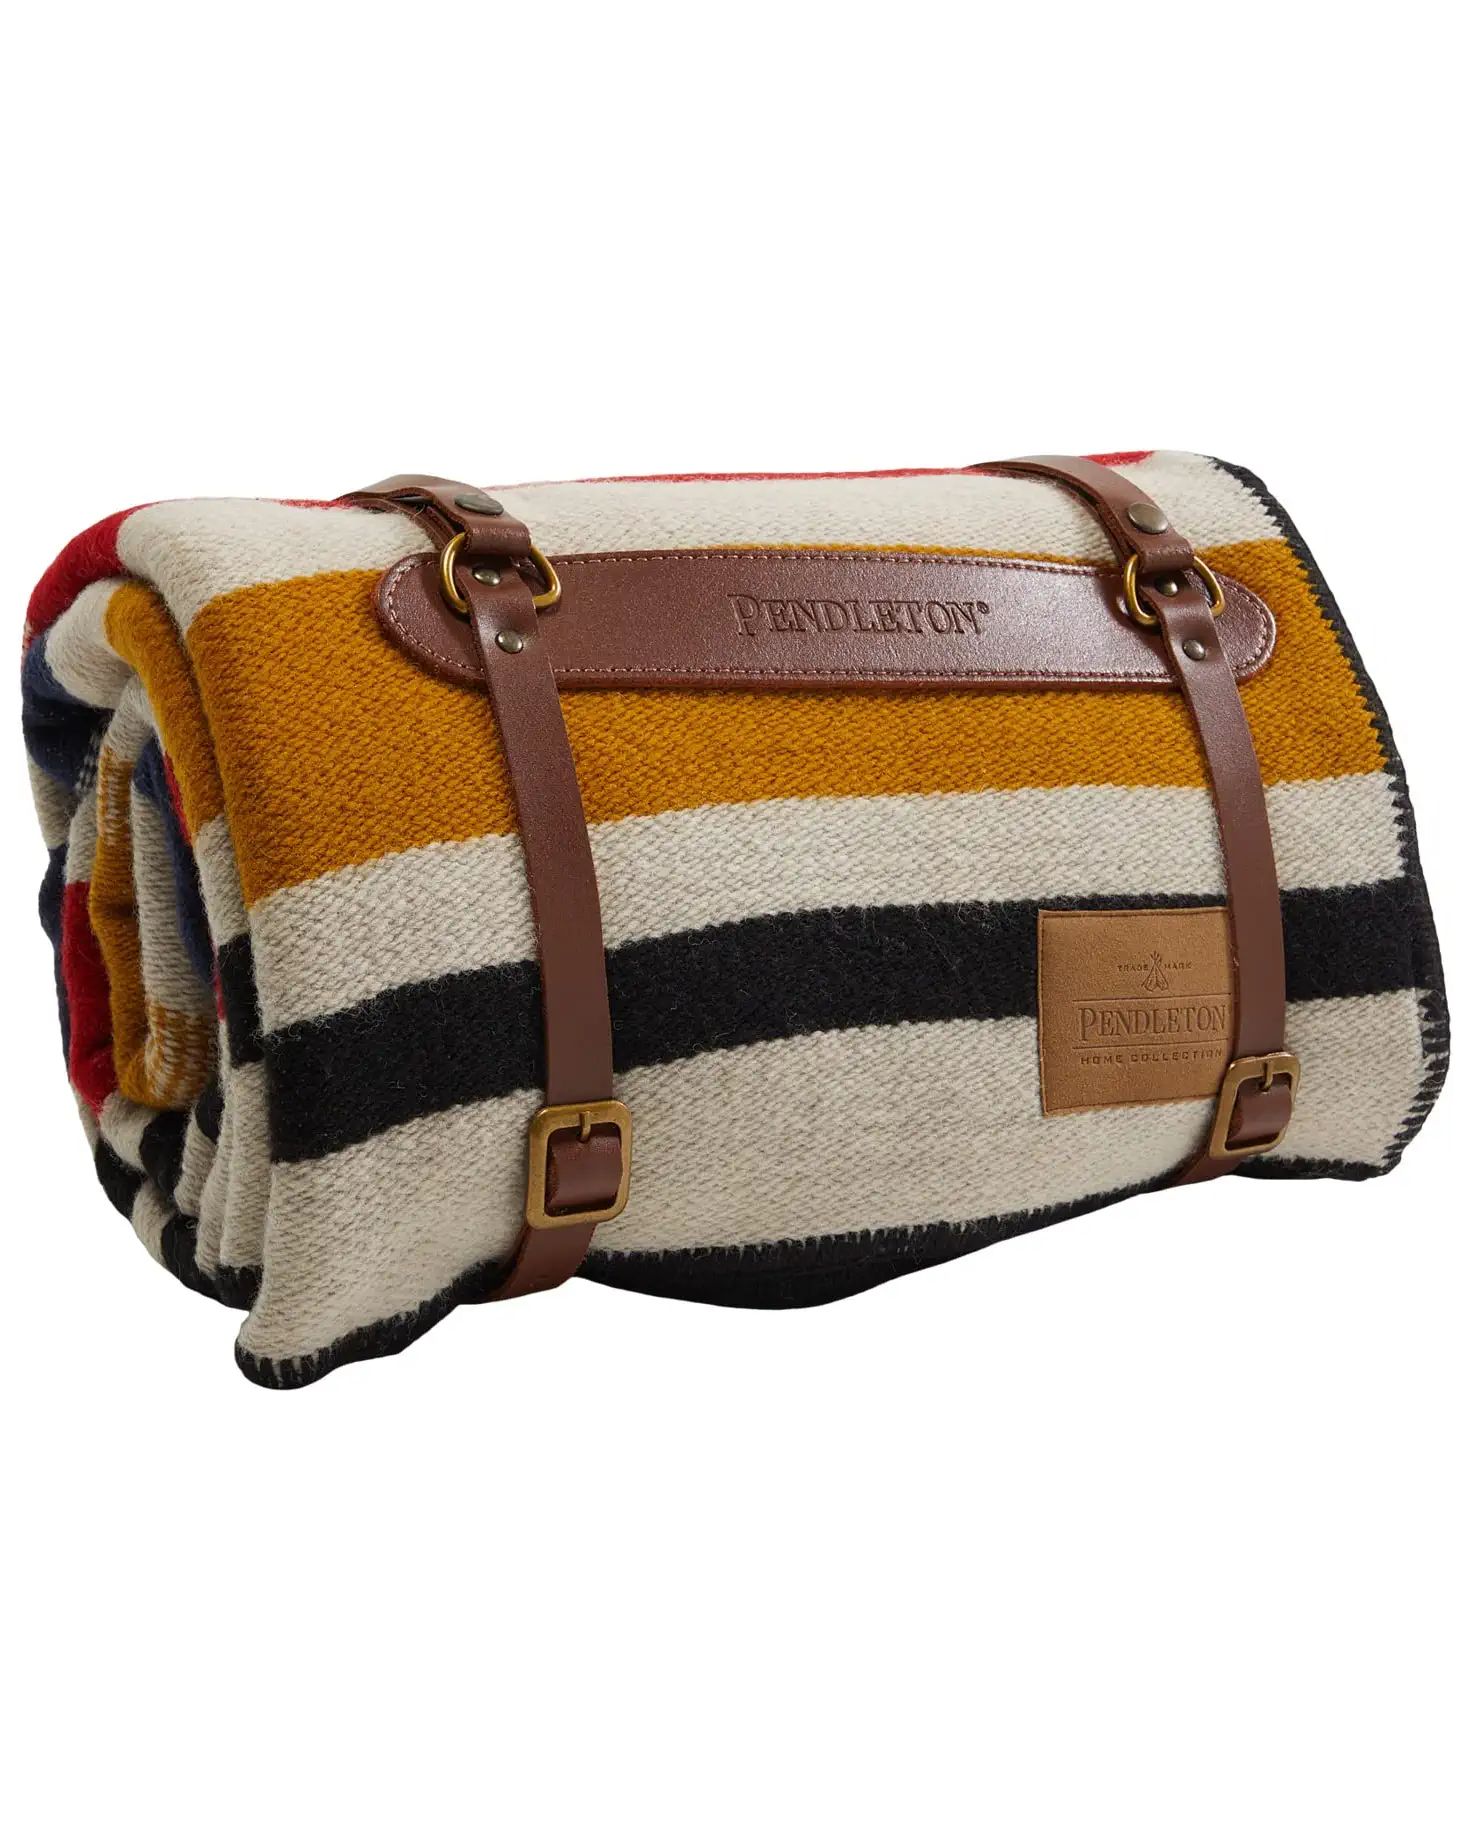 Pendleton Wool Carrier with Throw | Zappos